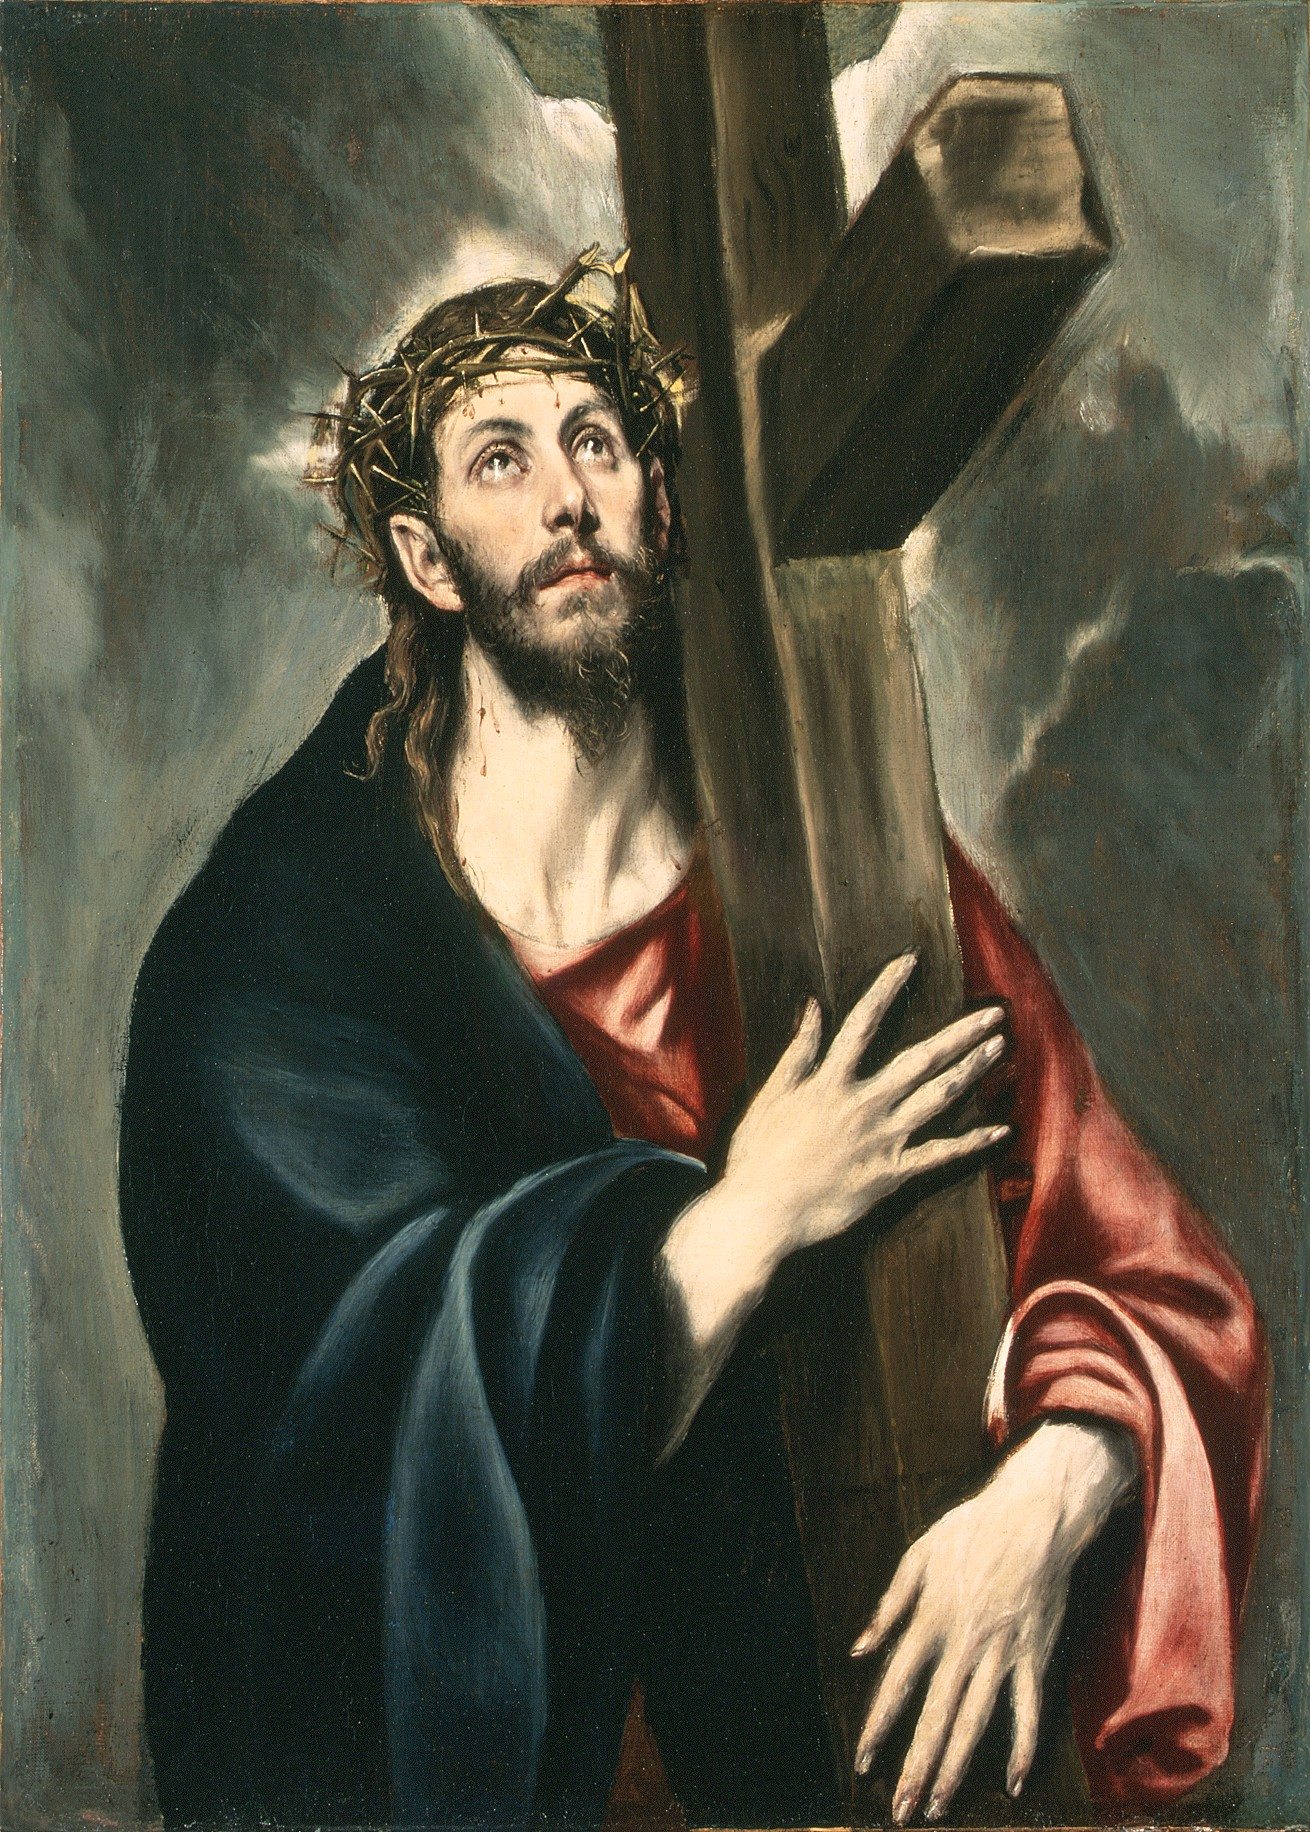 Le Greco, “Christ Carrying the Cross“ (ca. 1577–87). Huile sur toile. Robert Lehman Collection, 1975. The Metropolitan Museum of Art